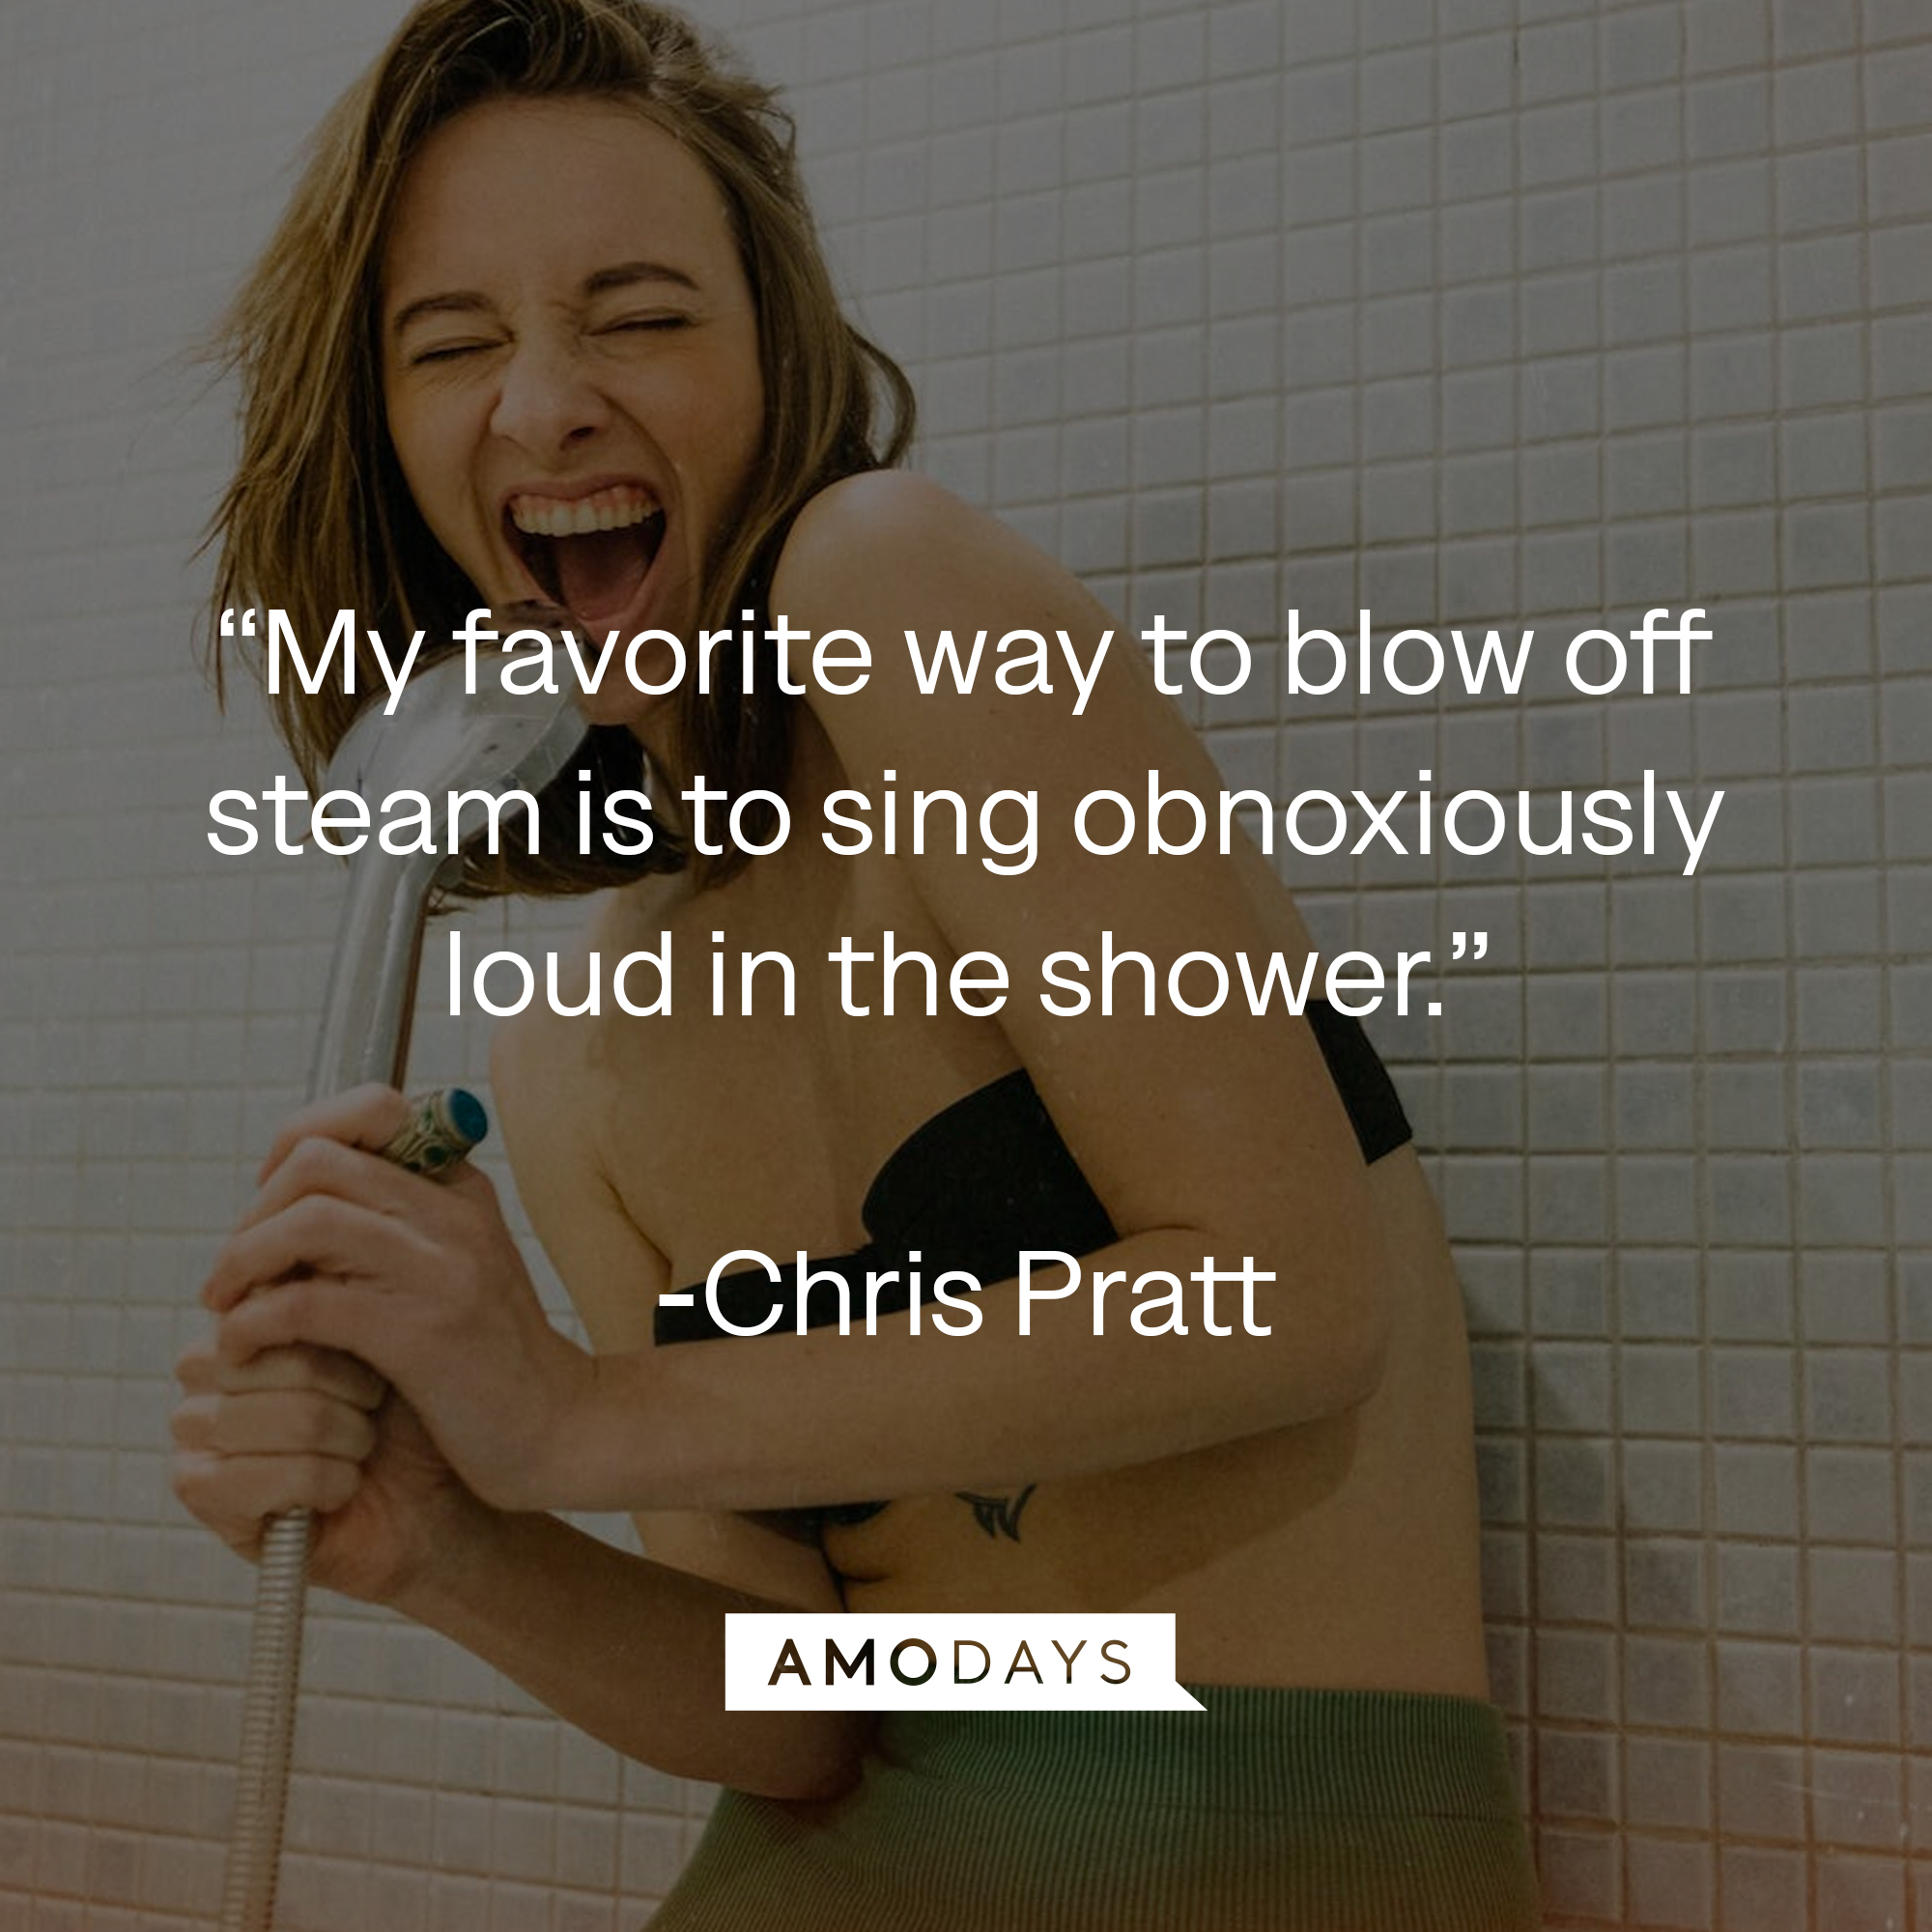 Chris Pratt's quote: "My favorite way to blow off steam is to sing obnoxiously loud in the shower." | Source: azquotes